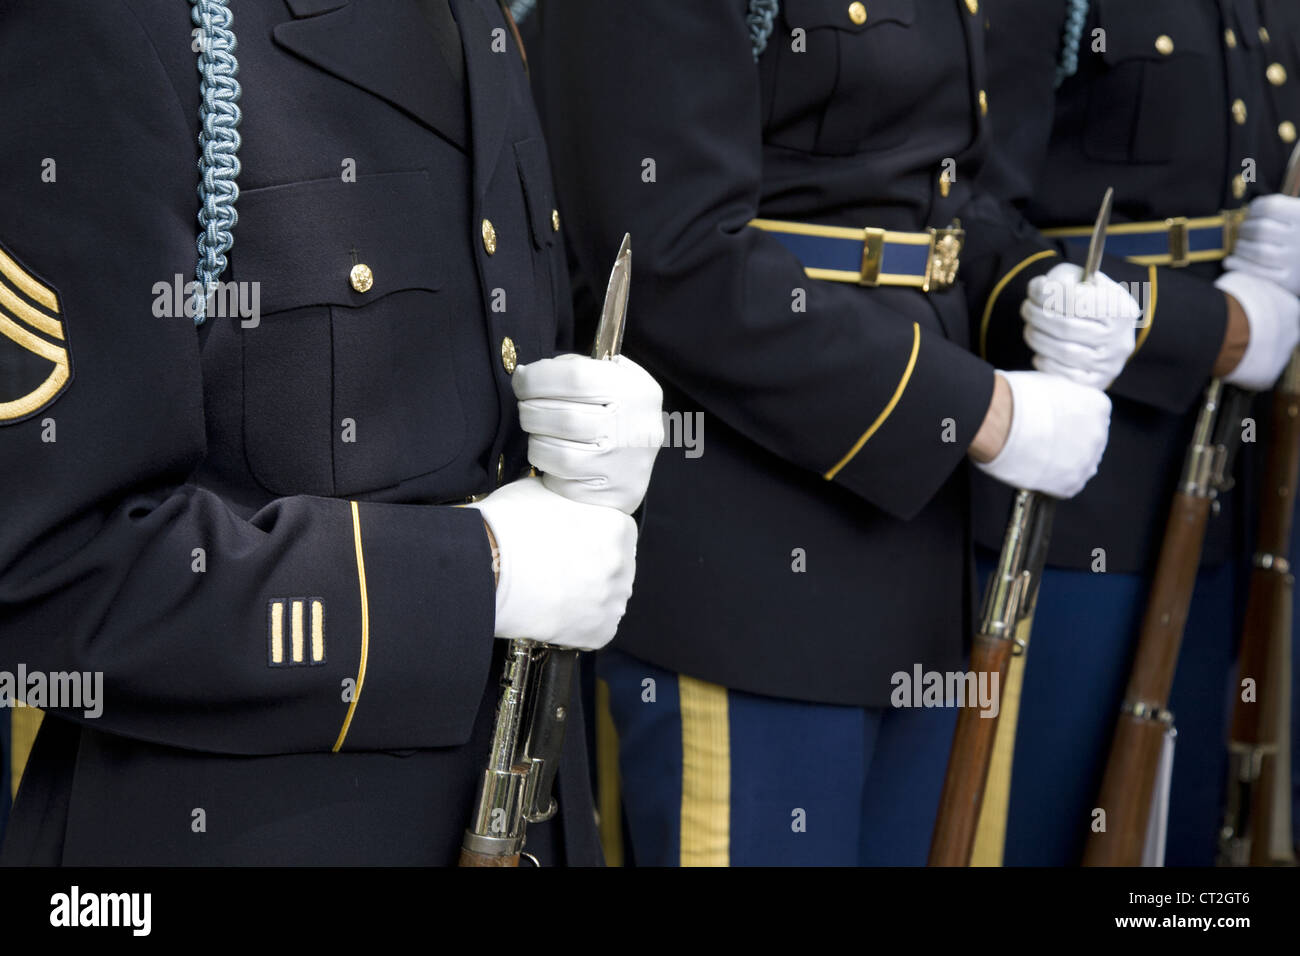 US Army 237th anniversary celebration in Bryant Park in New York City. Army Honor Guard. Stock Photo